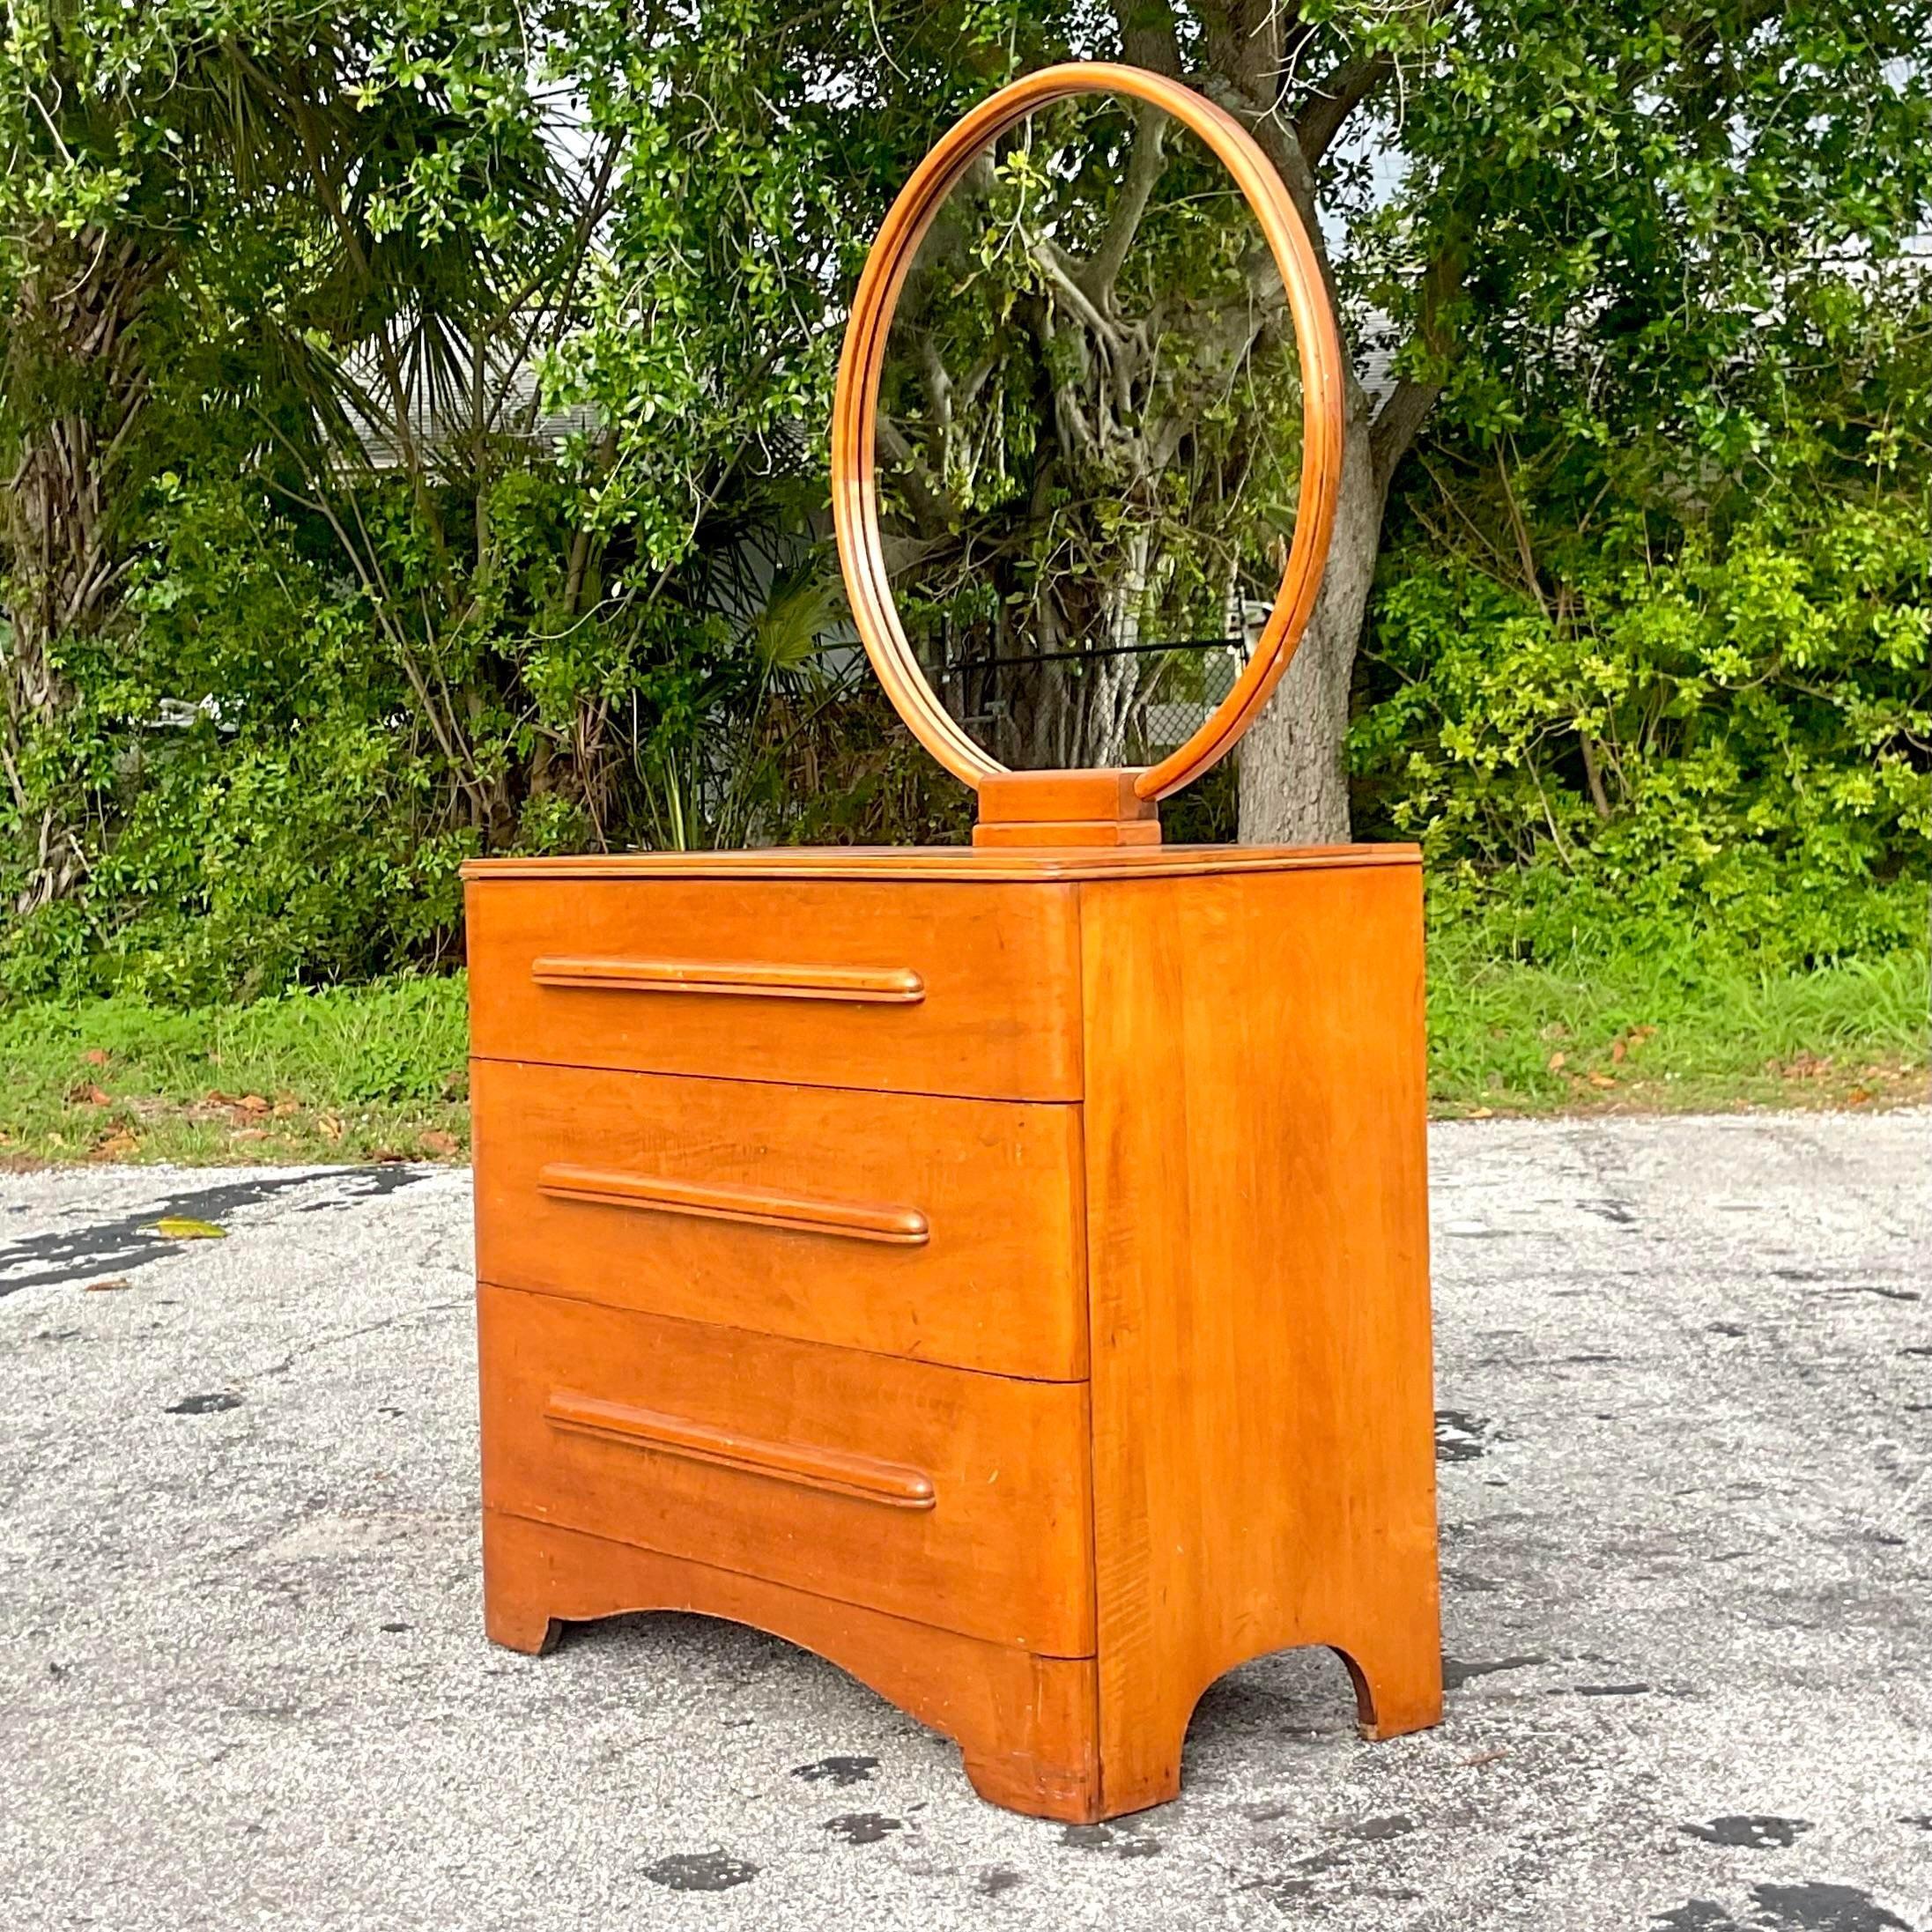 Experience mid-century modern charm with this vintage MCM maple dresser featuring a round mirror, a timeless embodiment of American craftsmanship and design ingenuity. Crafted with exquisite maple wood, its clean lines and sleek silhouette evoke a